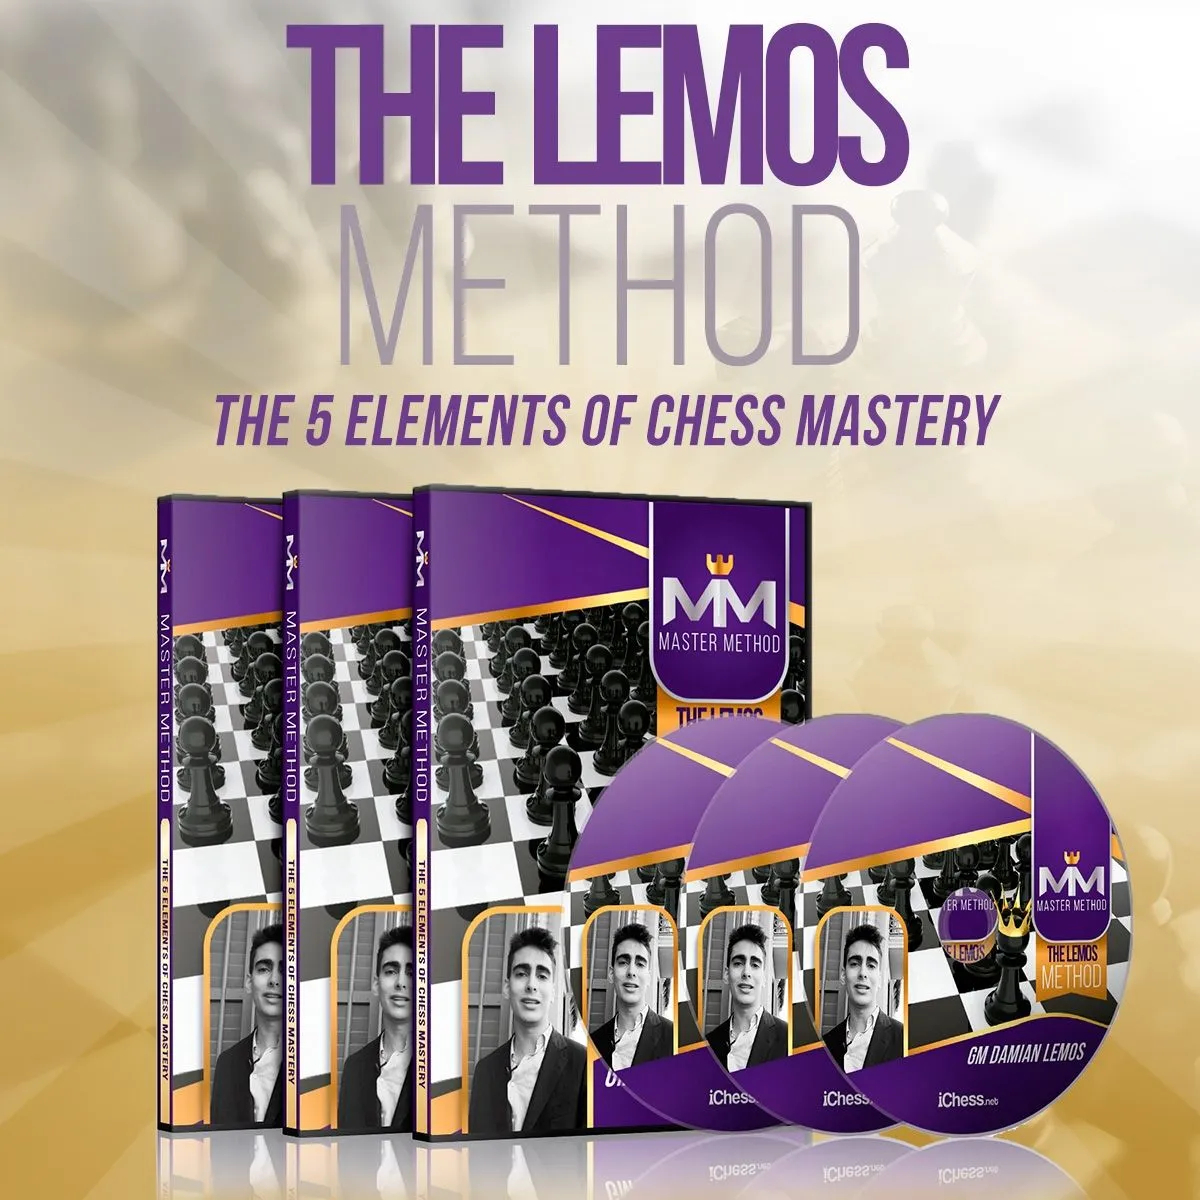 https://www.chesscomshop.com/media/catalog/product/cache/36ddcfecb9bcfbaa2afb93c161df3a15/t/h/thelemosmethod-the-5-elements-of-chess-mastery_2.jpg